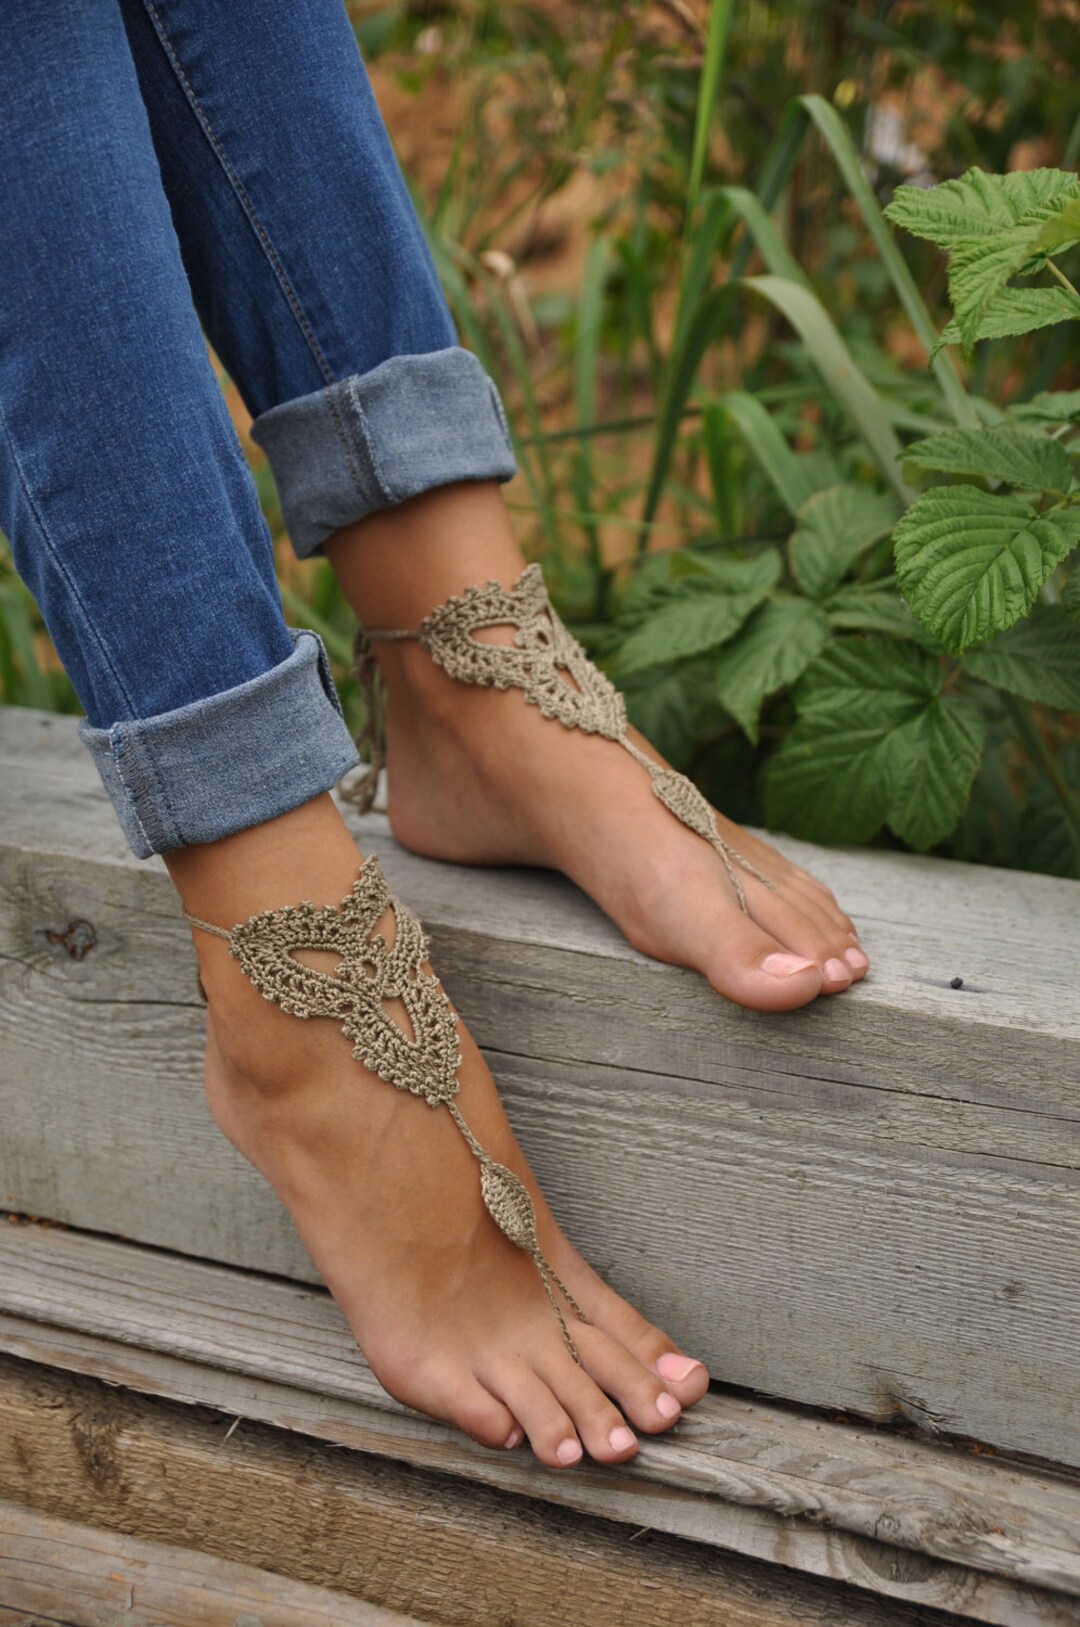 Crochet Tan Barefoot Sandals Taupe Nude Shoes Foot Jewelry picture